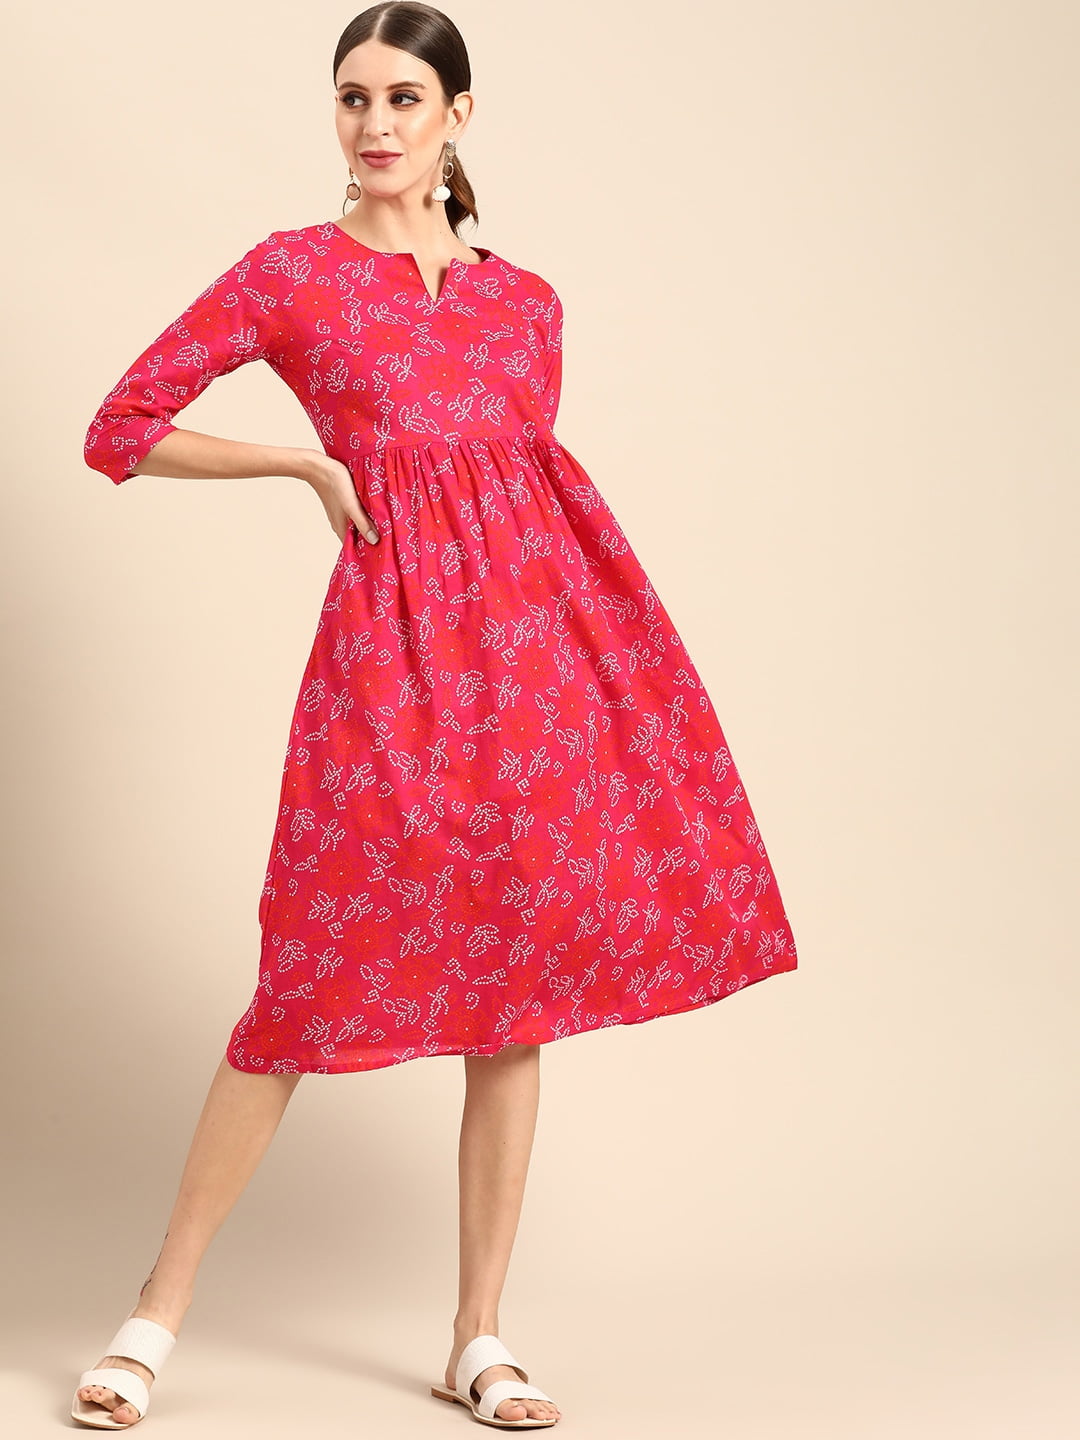 Discover more than 92 myntra formal kurtis latest